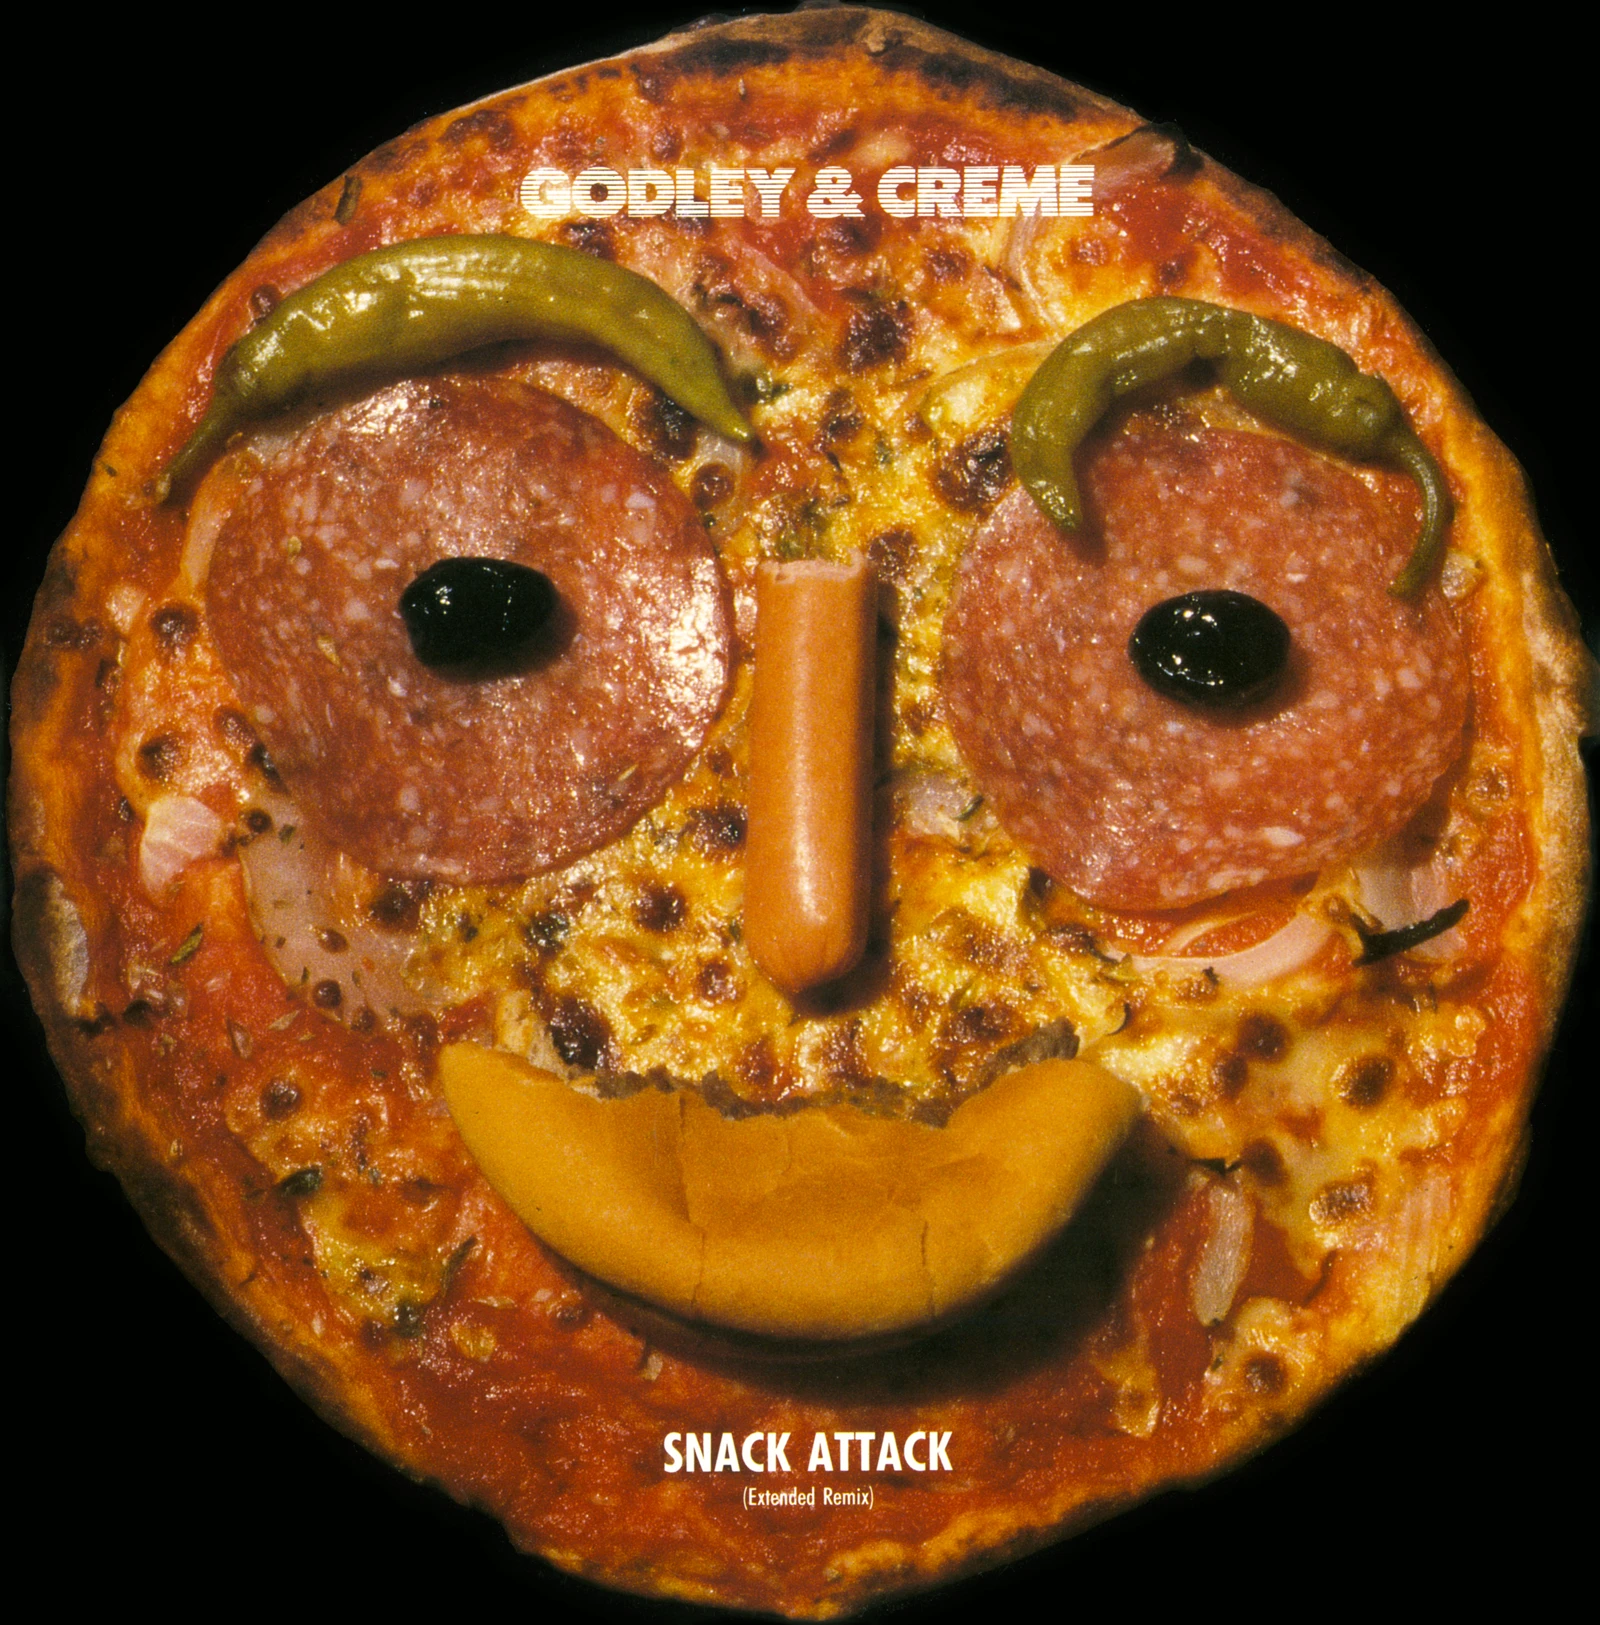 Snack Attack (Extended Remix) – Godley & Creme